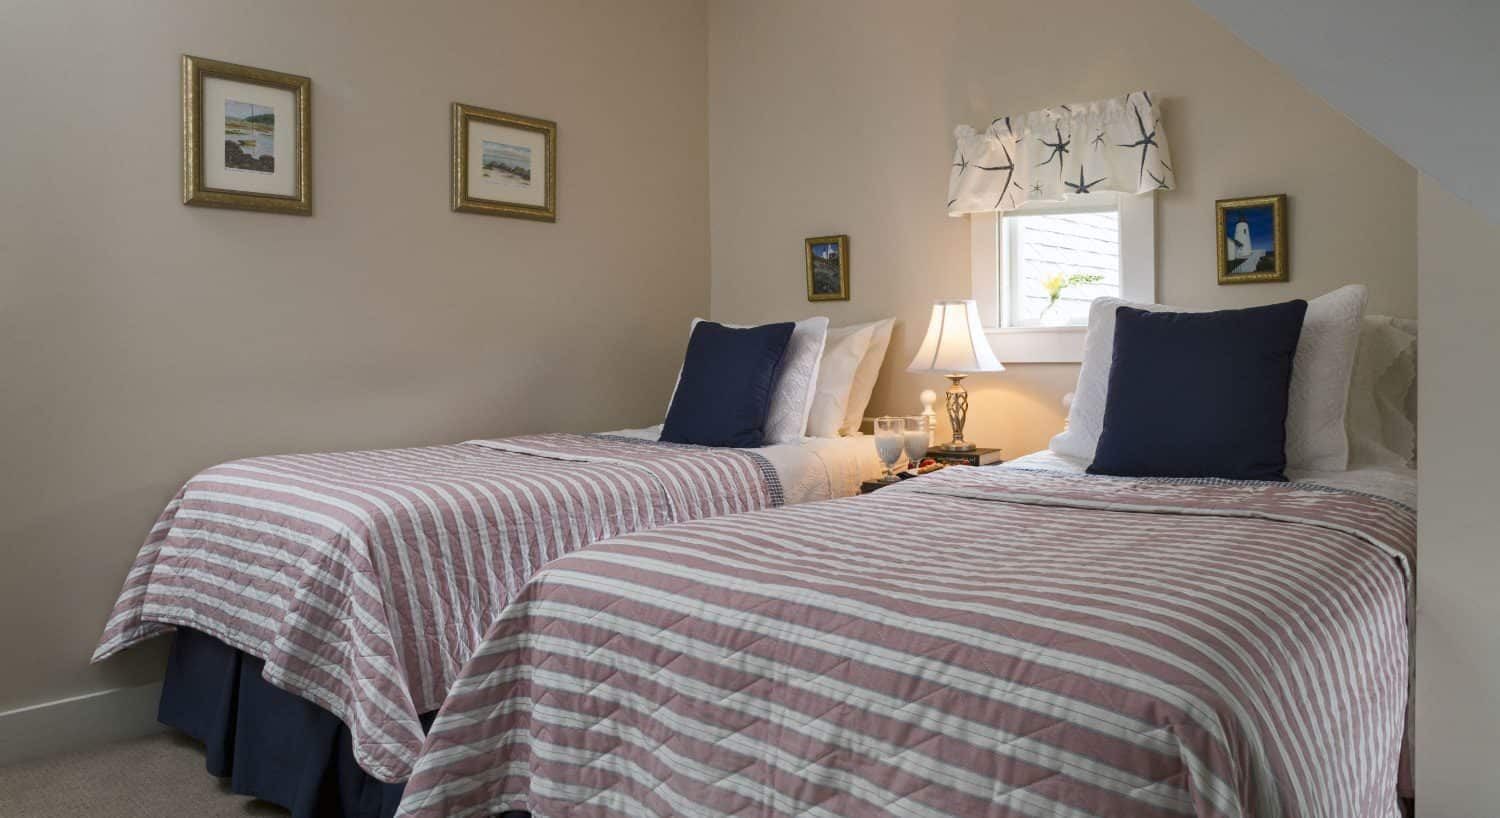 Bedroom with light cream walls, white trim, and two twin beds with light pink, white and navy bedding